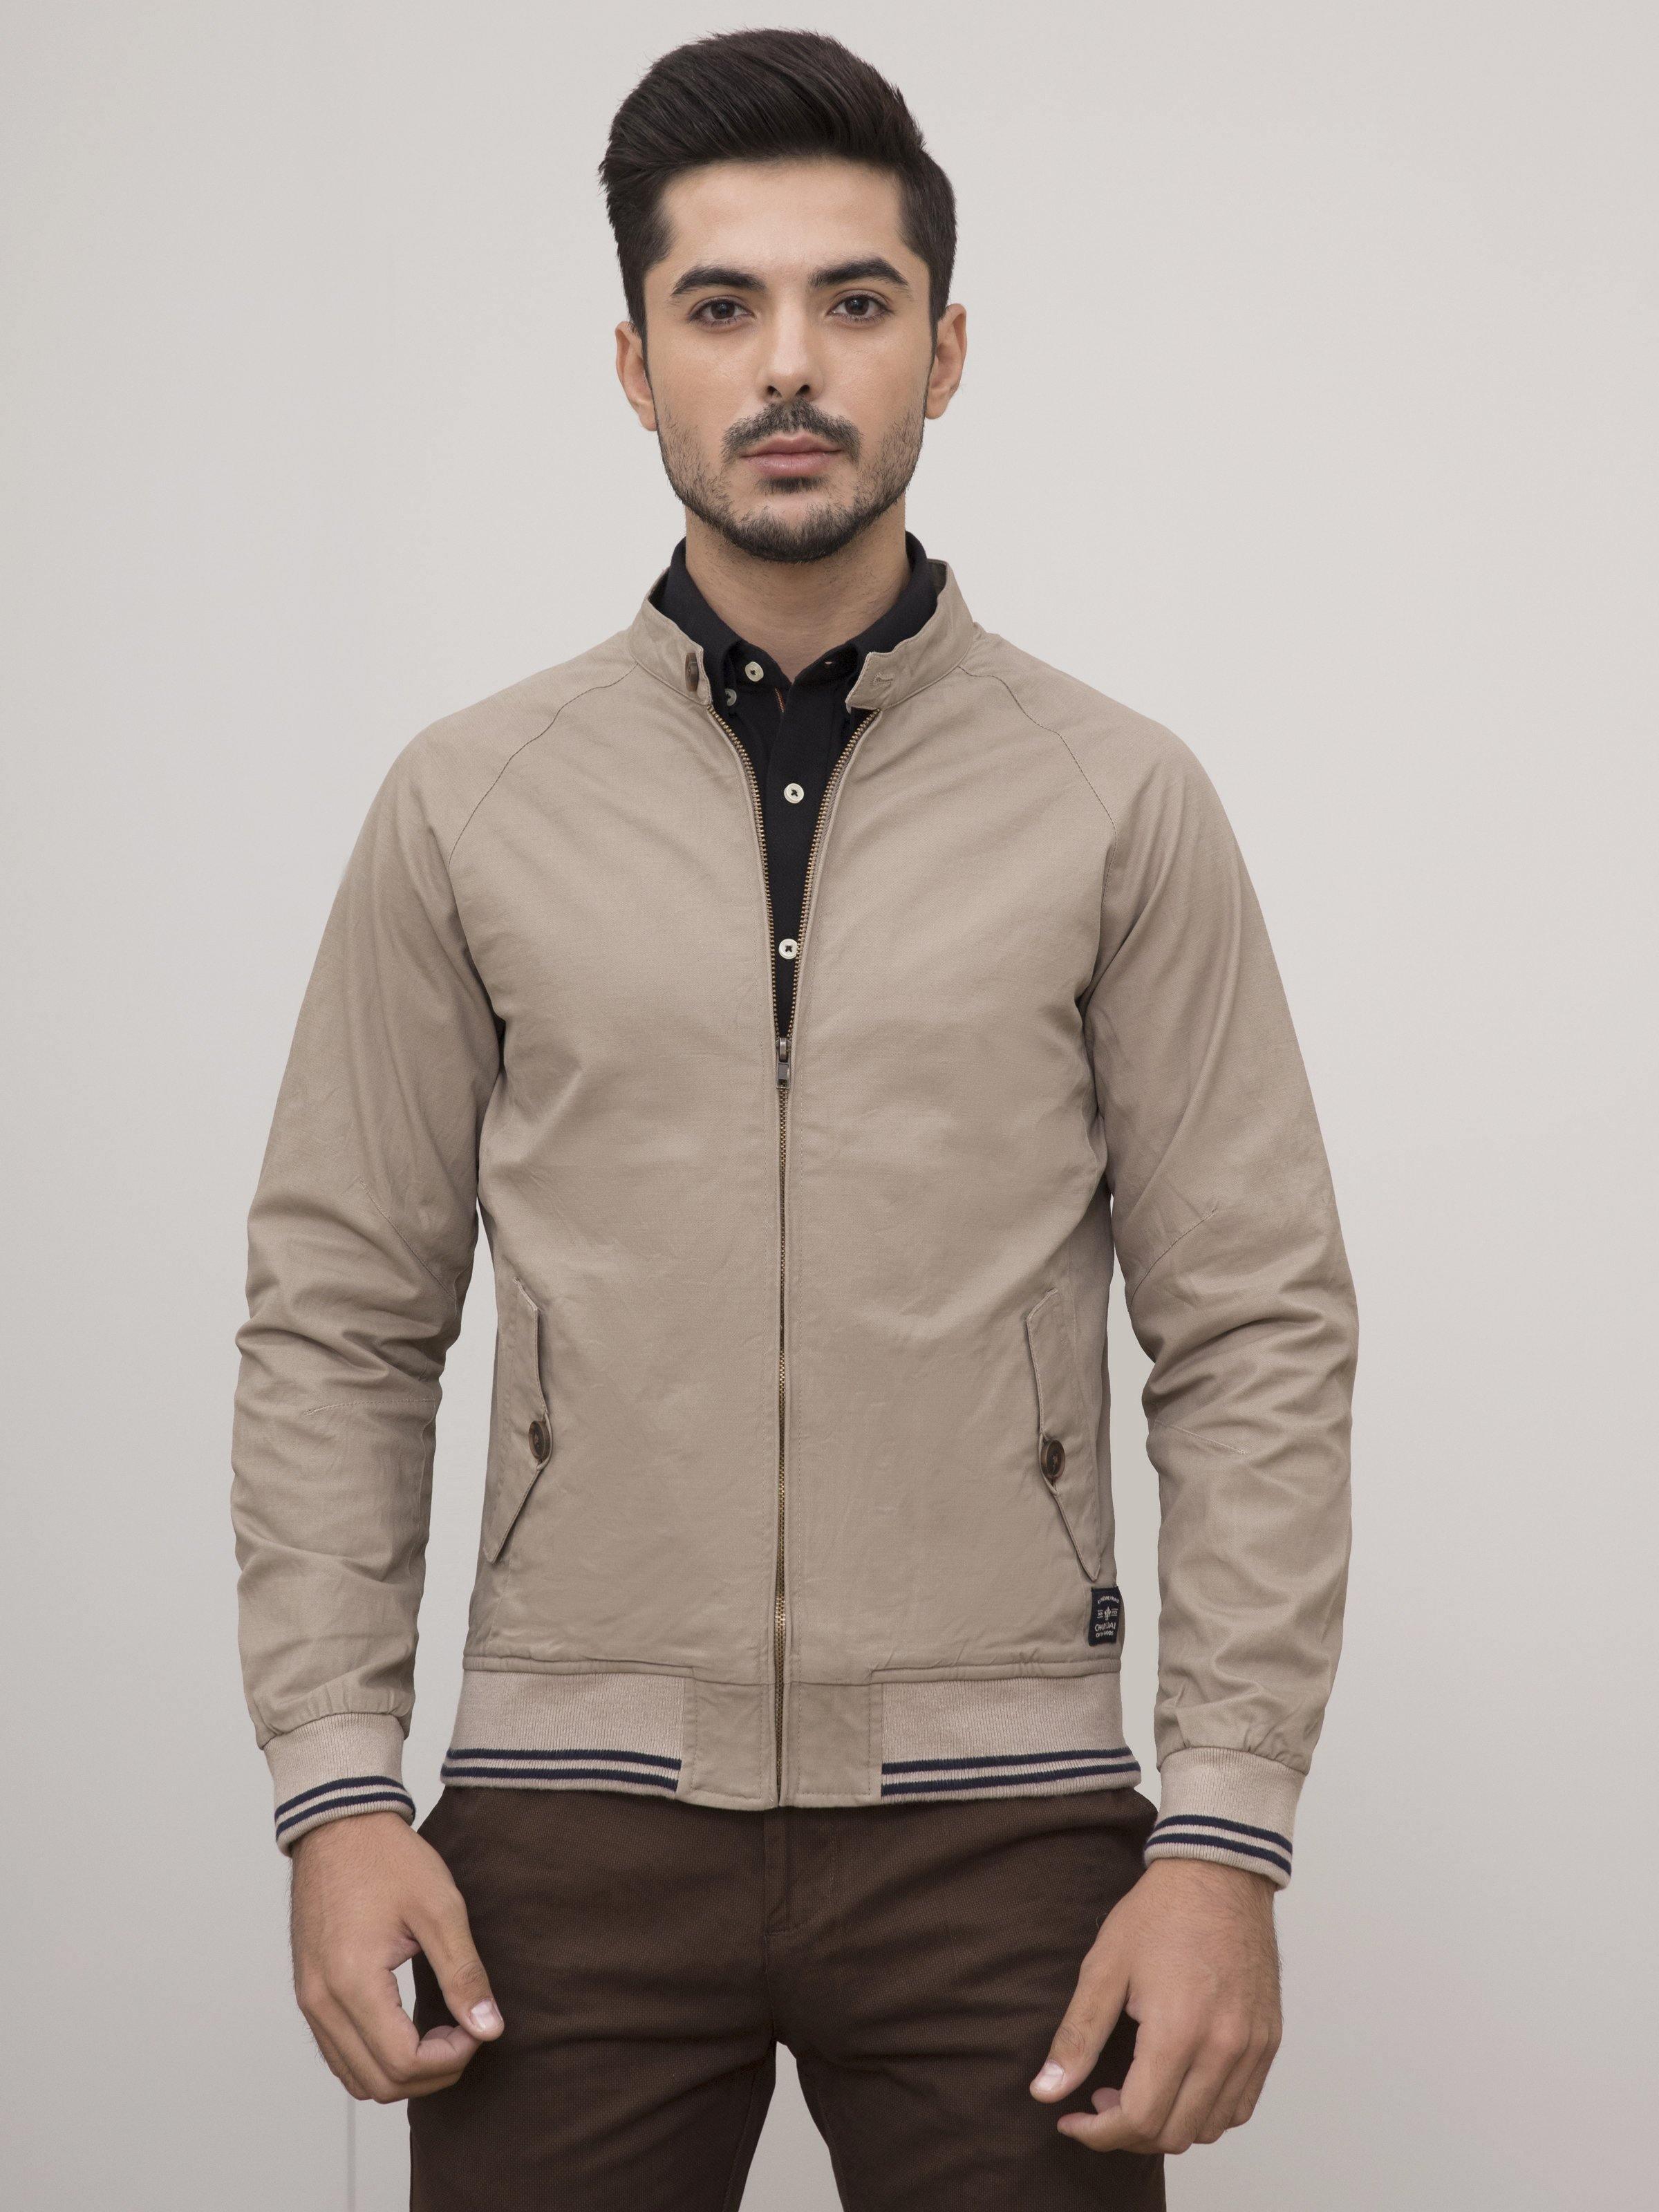 JACKET SMALL BAN FULL SLEEVE BEIGE at Charcoal Clothing